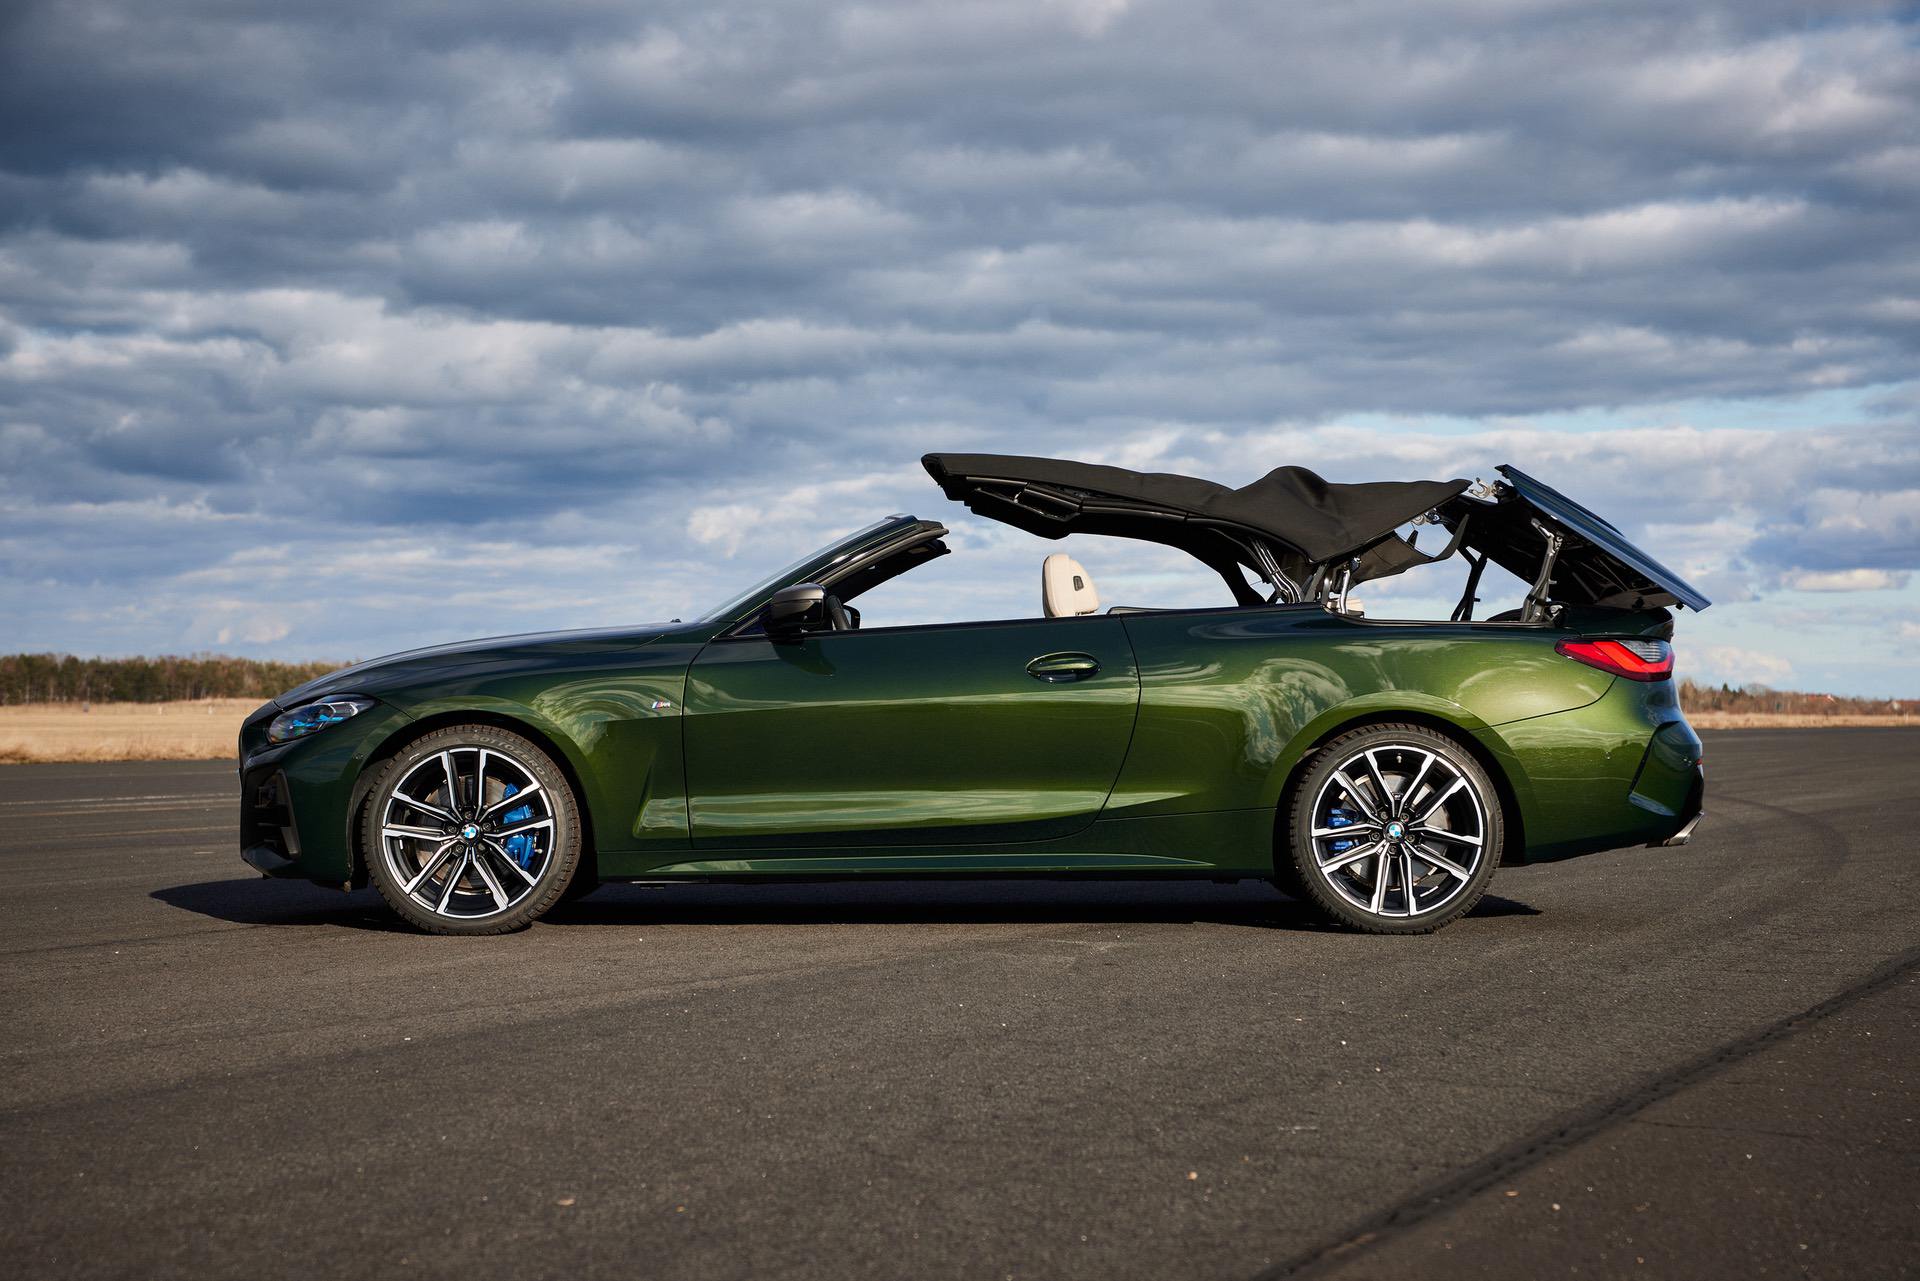 We take a closer look at the 2021 BMW M440i xDrive Convertible - VIDEO